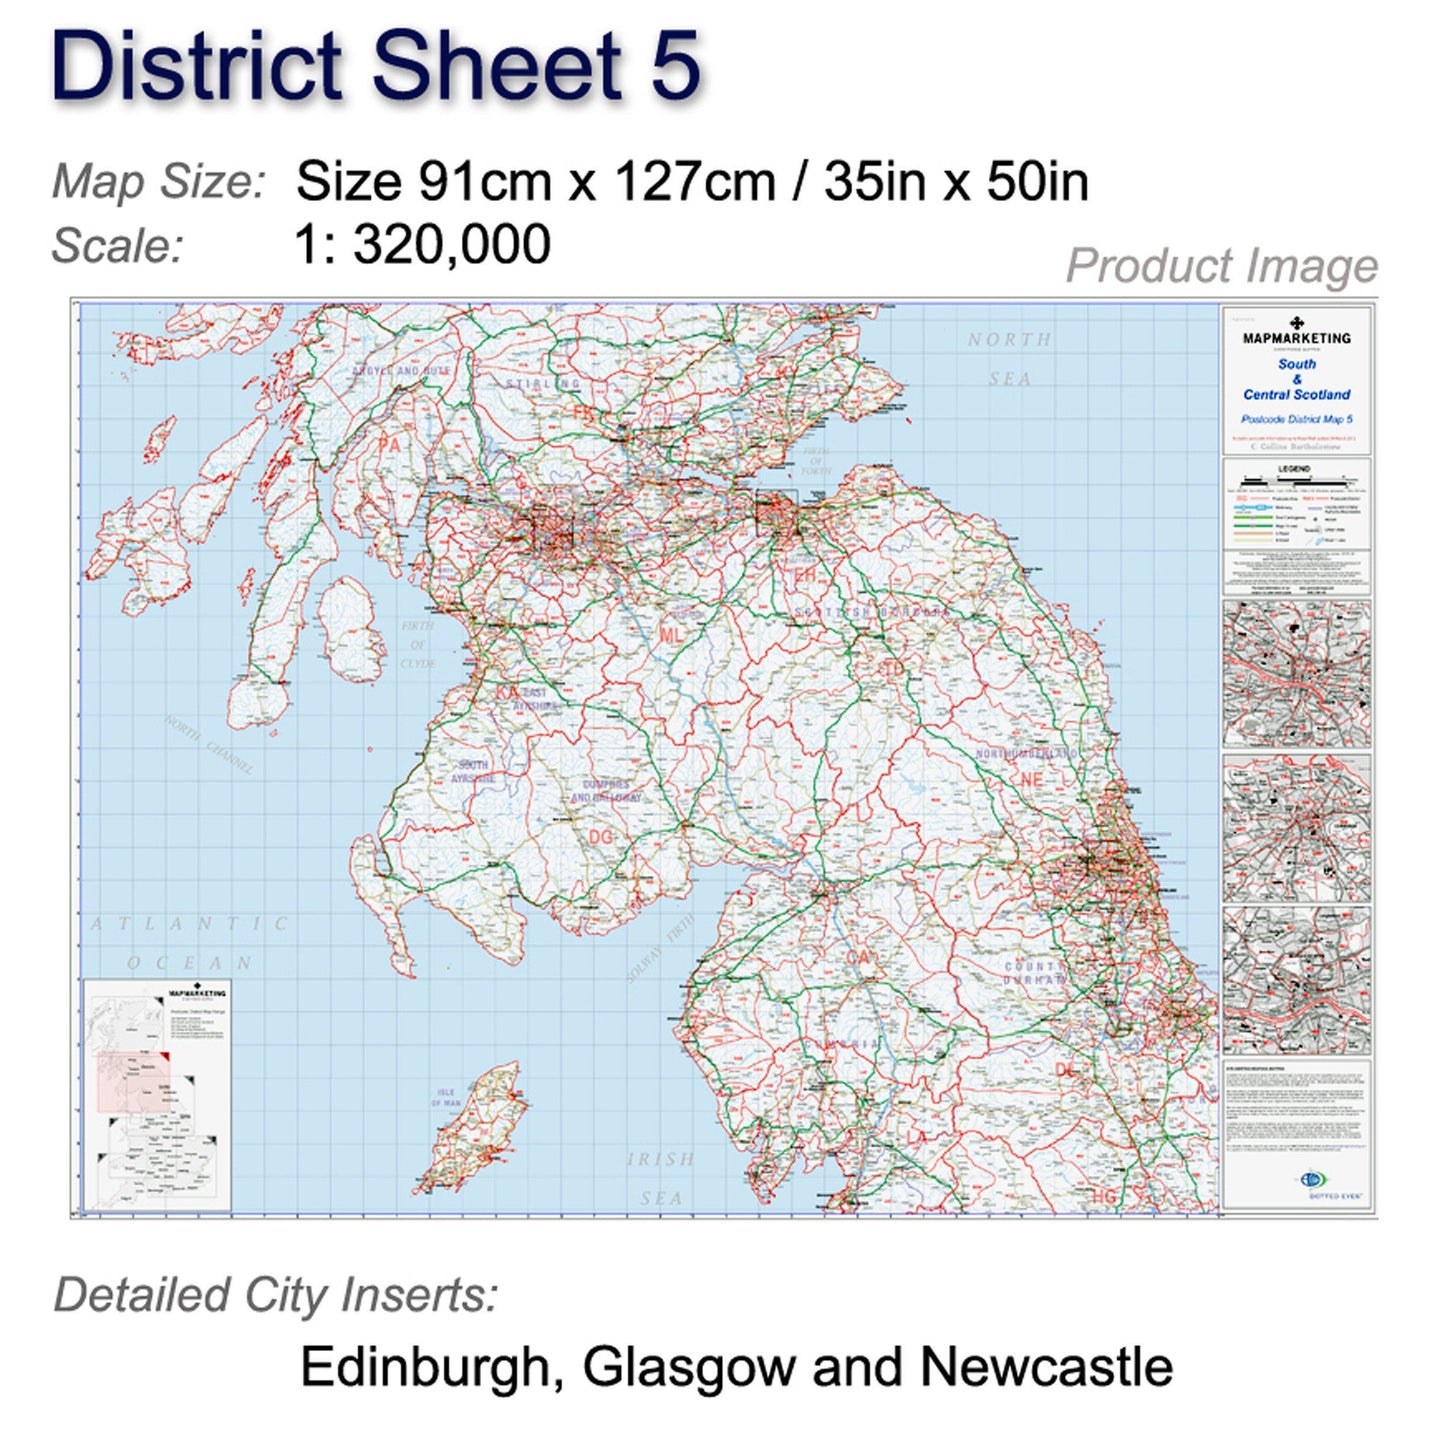 Wall Maps - South And Central Scotland (Glasgow, Edinburgh And Newcastle-upon-Tyne) Postcode Wall Map - District Map 5